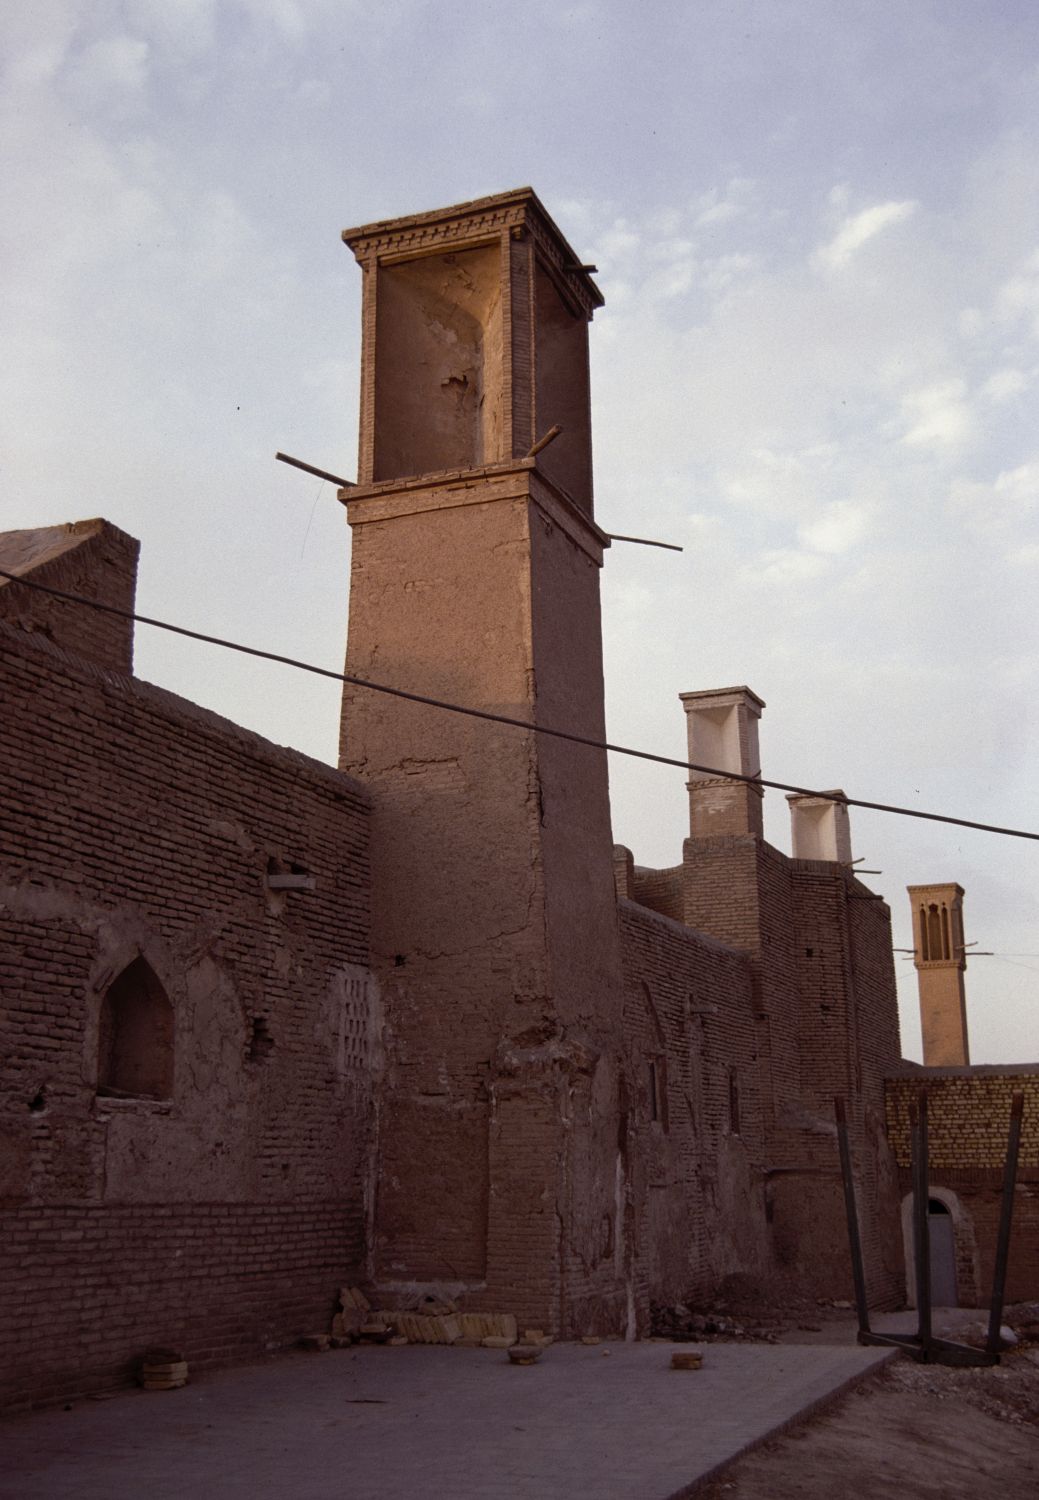 View of wind towers (<span style="font-style: italic;">badgirs</span>).